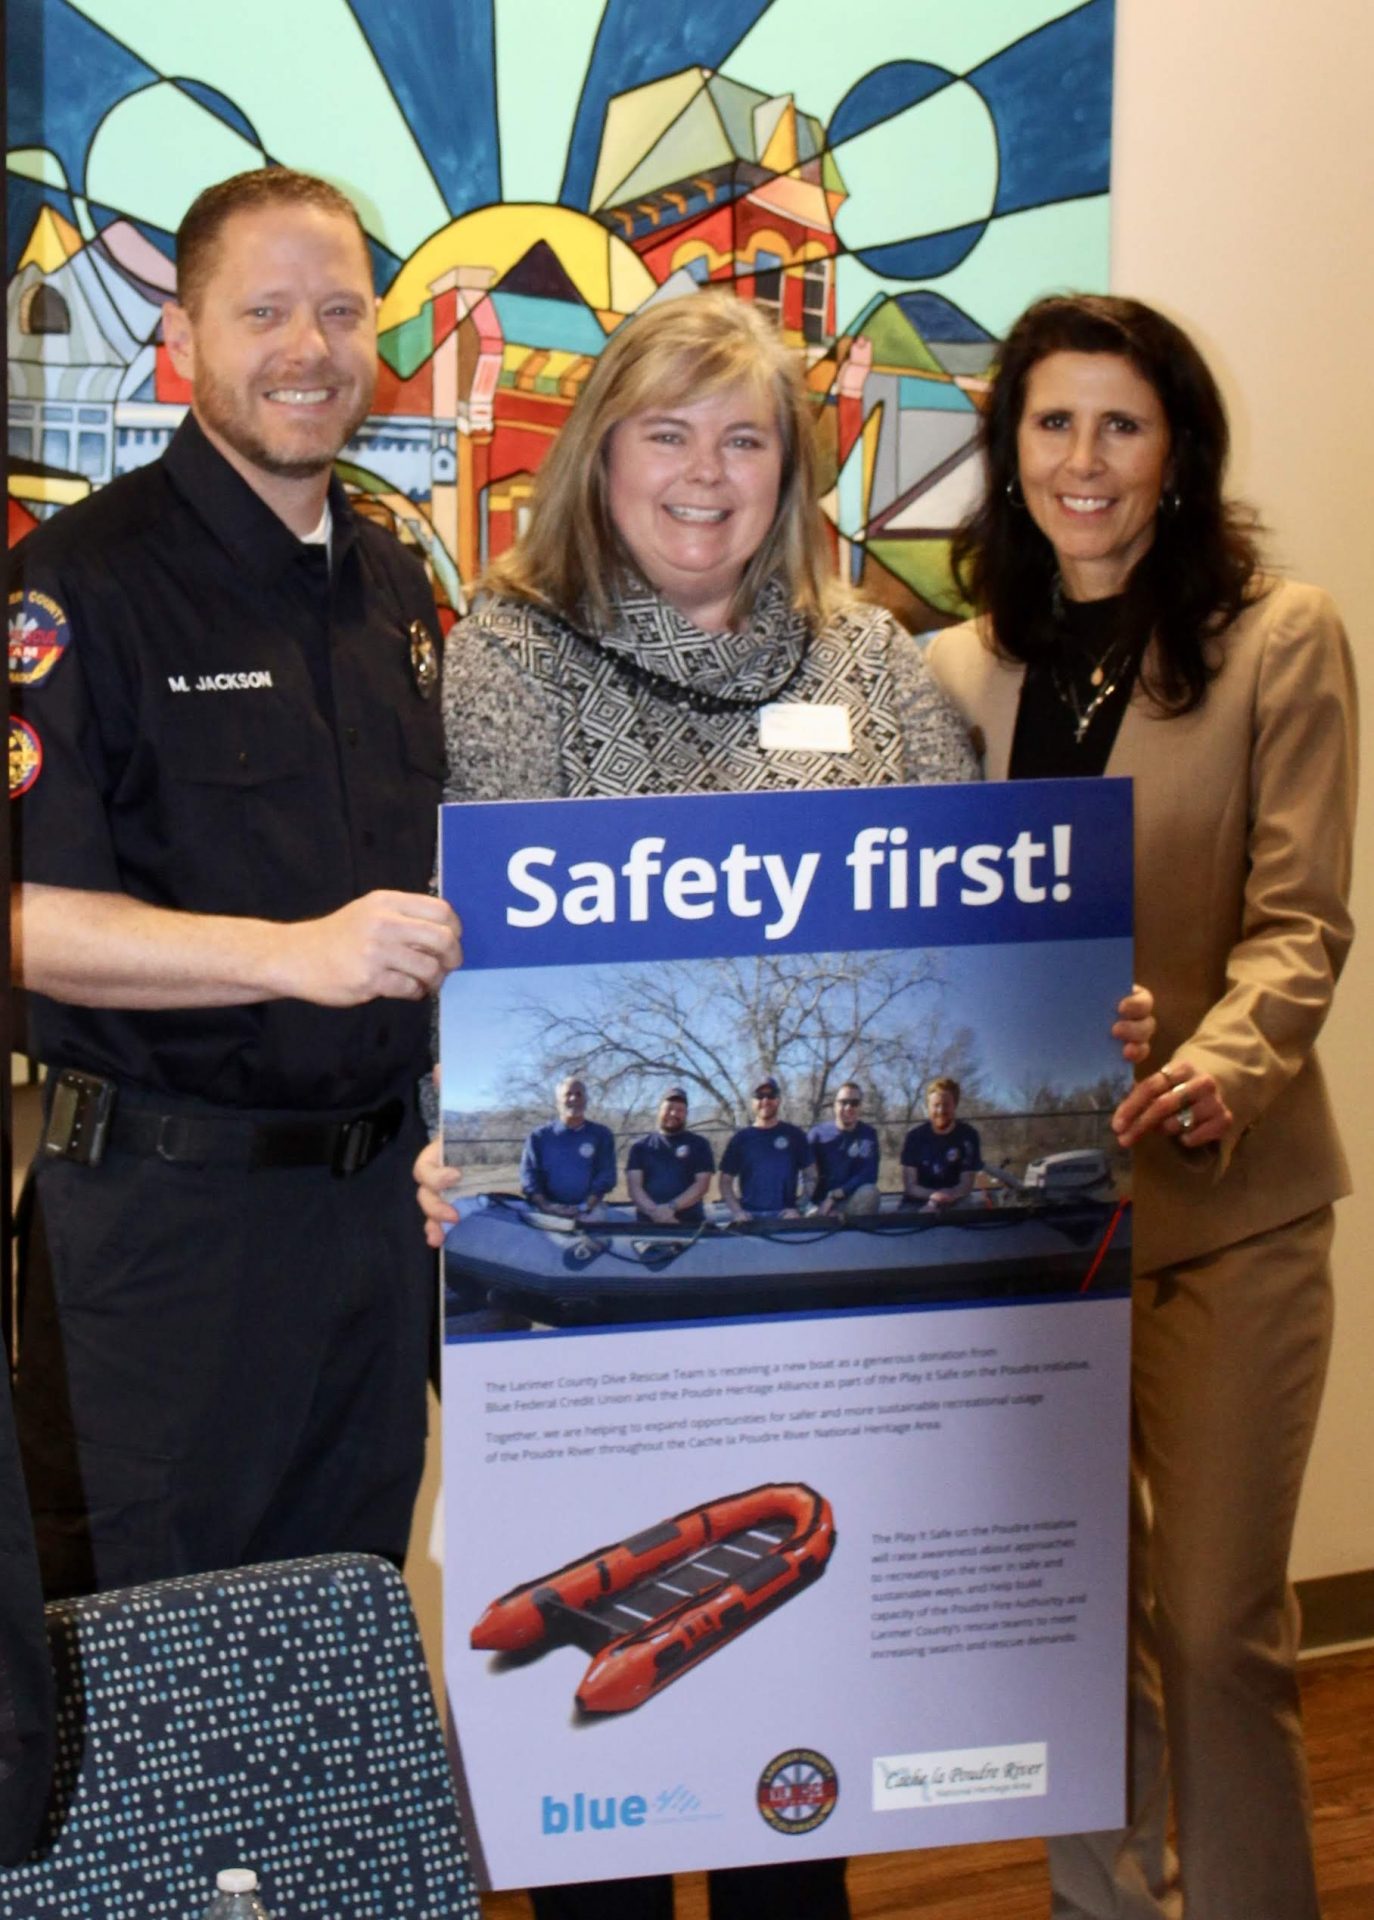 Play It Safe on the Poudre Initiative Receives $10,000 donation from Blue Federal Credit Union